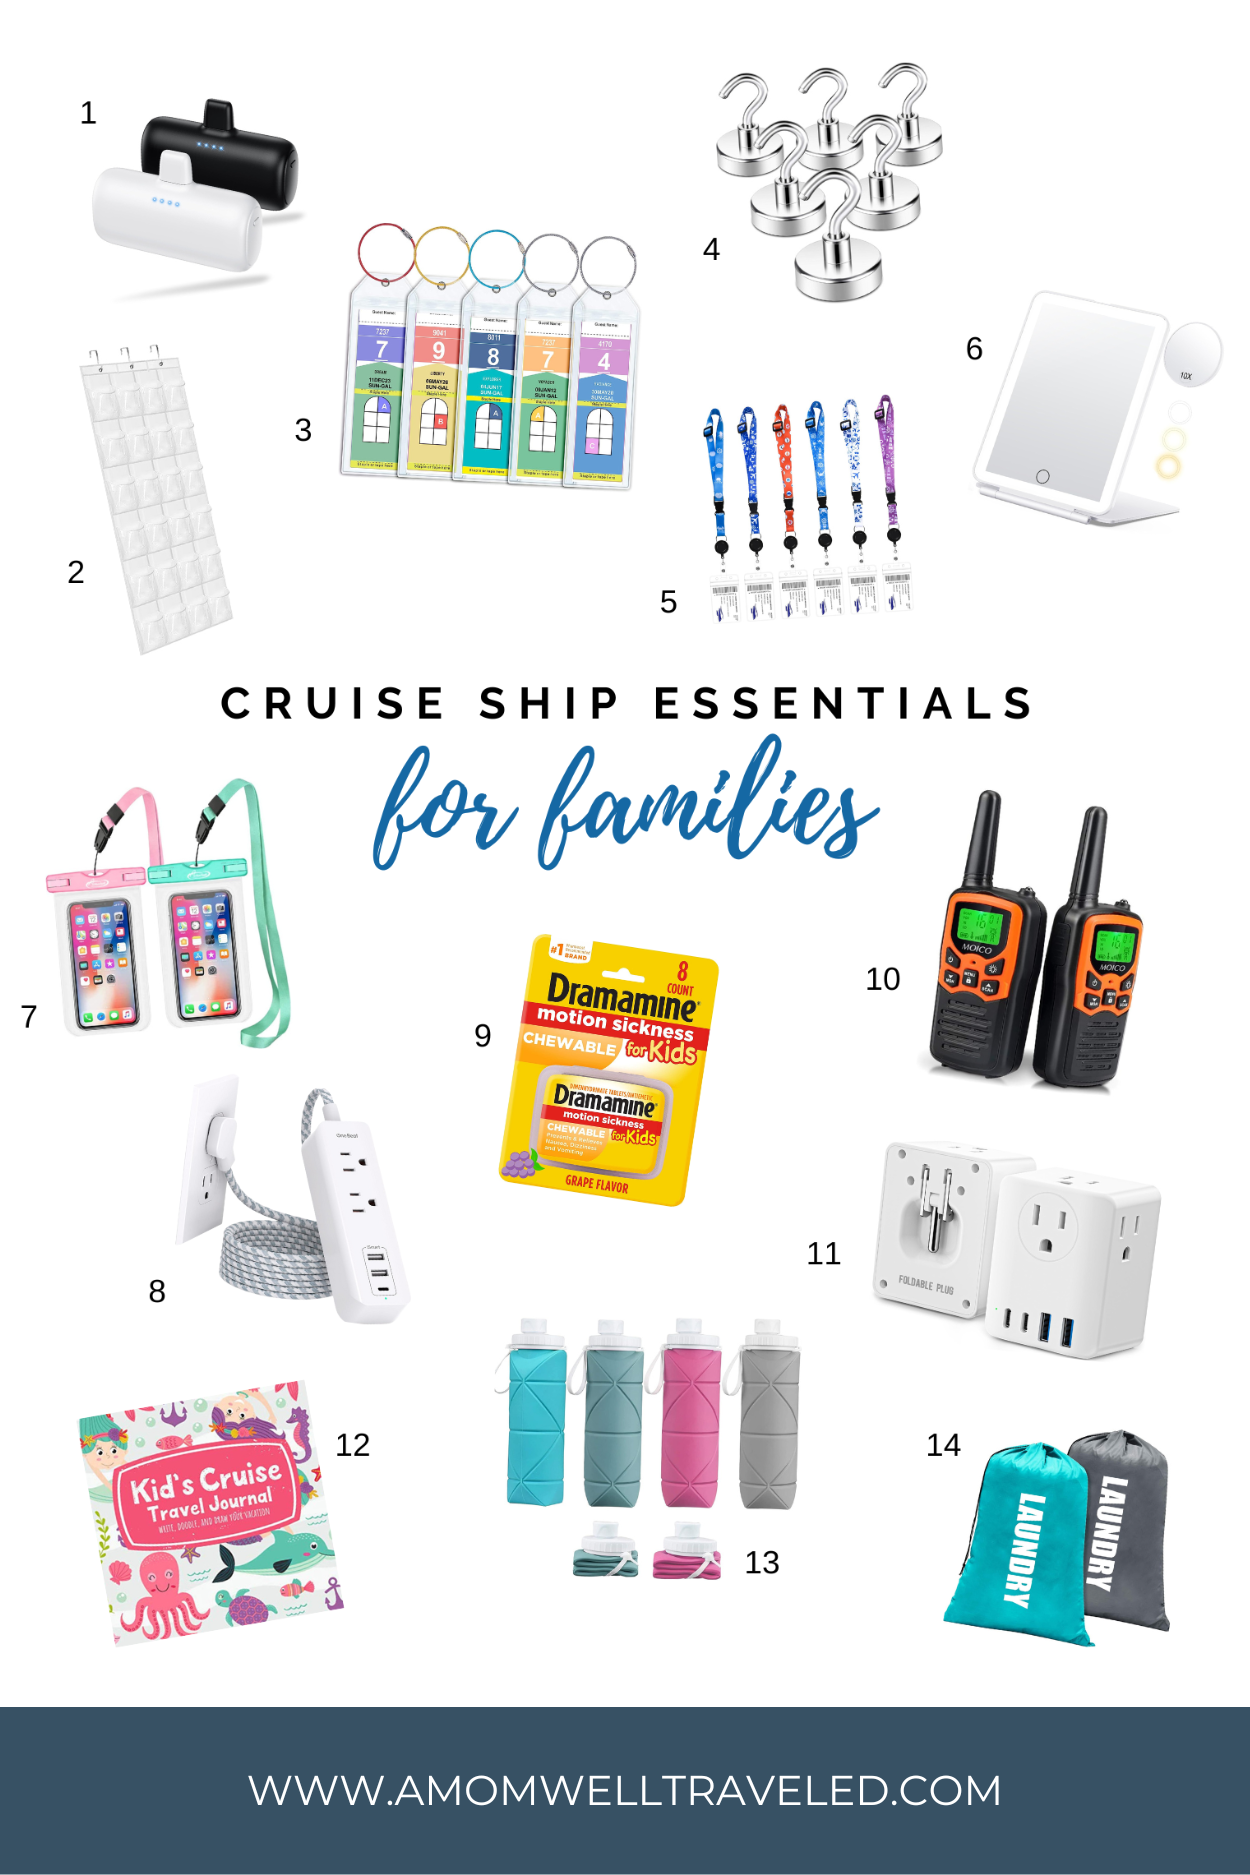 Cruise Ship Essentials for Families from Amazon